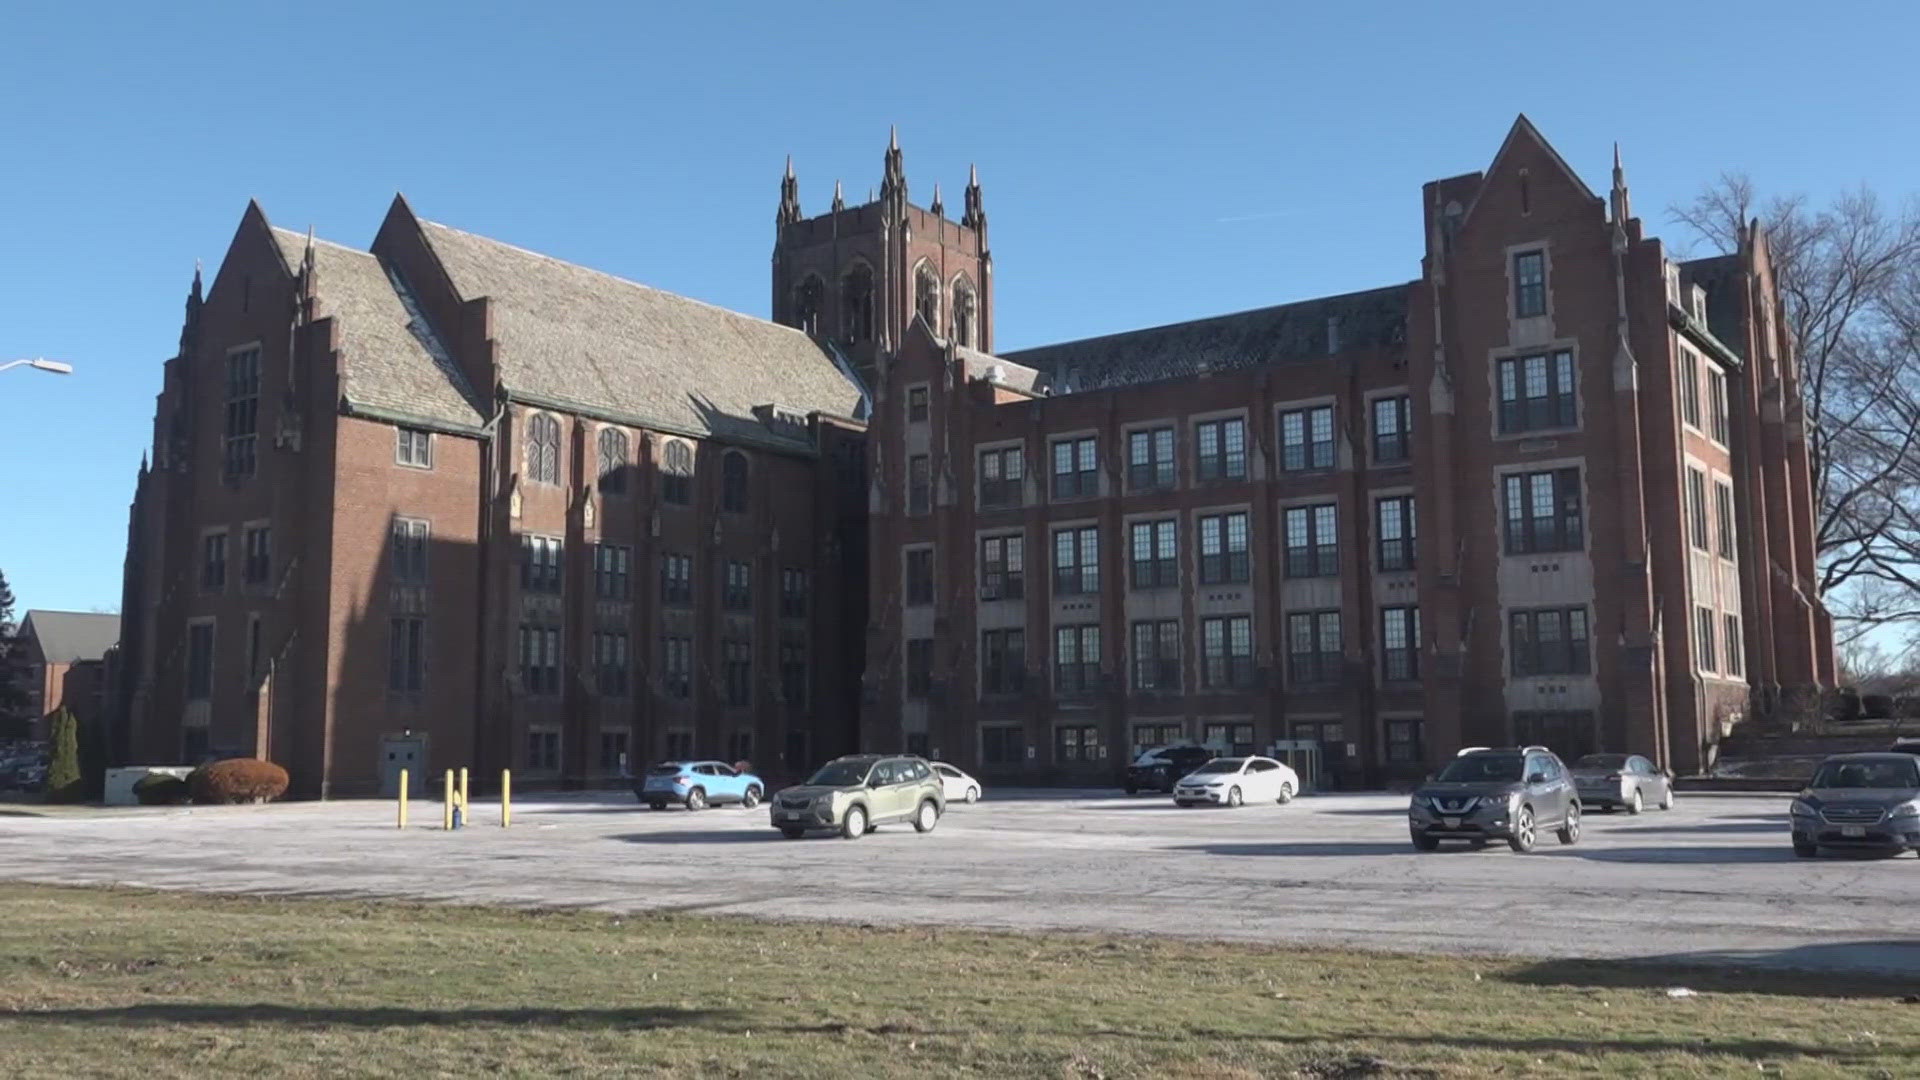 After more than 100 years, Notre Dame College in South Euclid is having its final classes today.